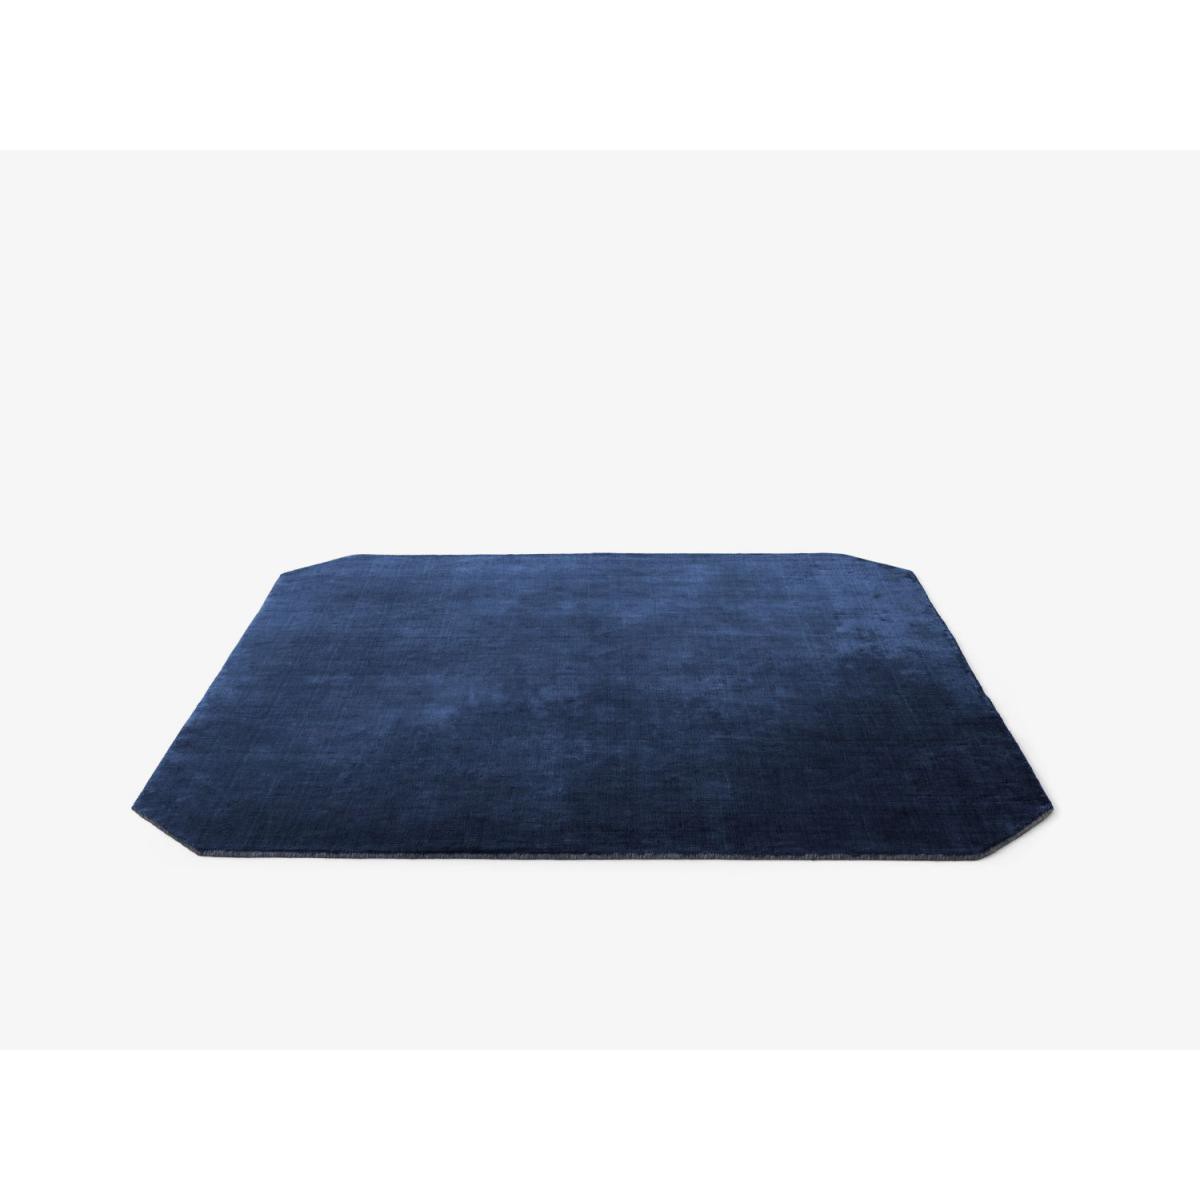 Andtradition - Tapis The Moor - bleu nuit - 240 x 240 cm - Tapis